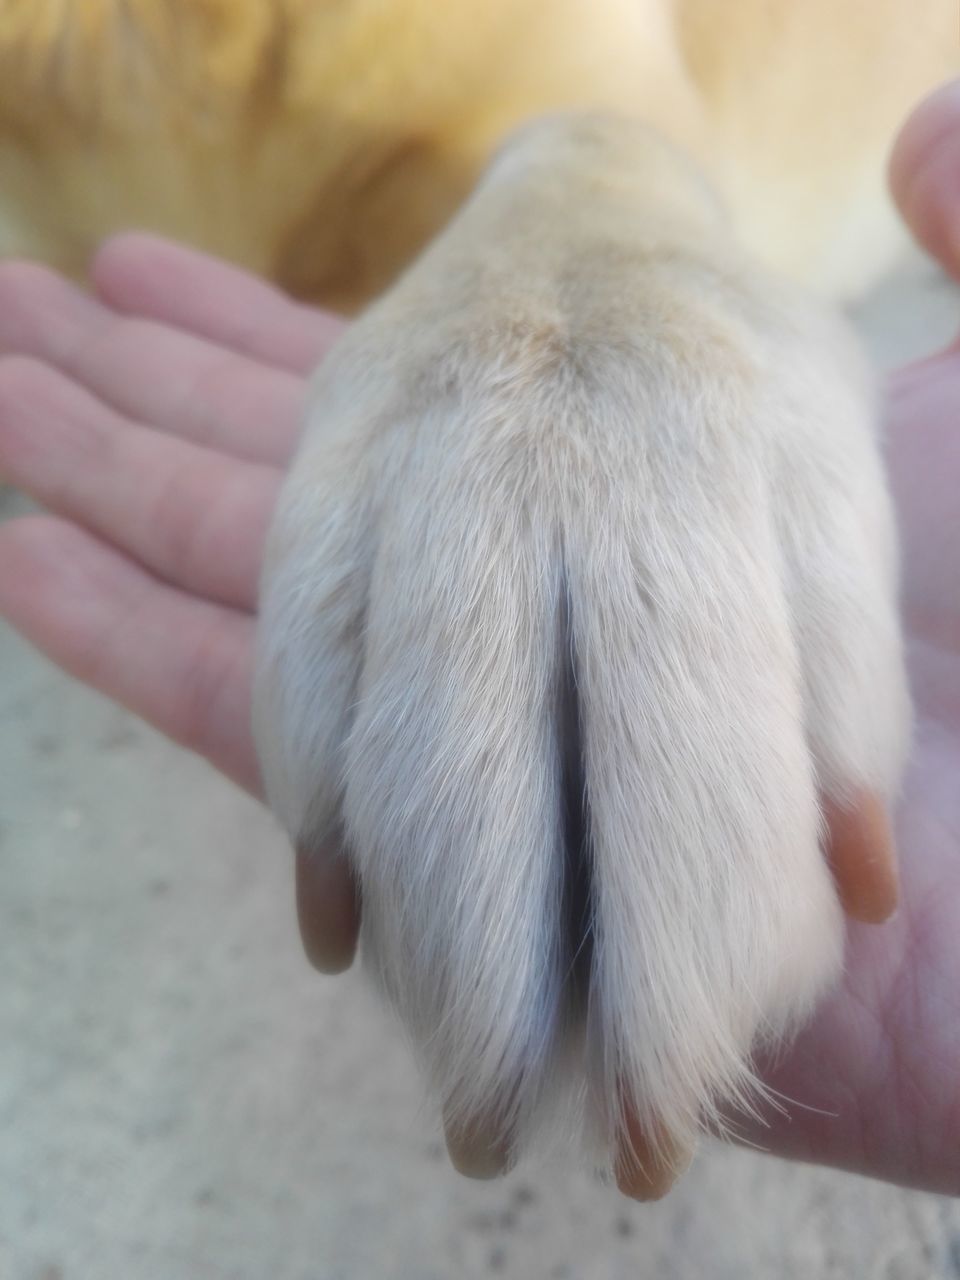 CLOSE-UP OF A HAND HOLDING ANIMAL